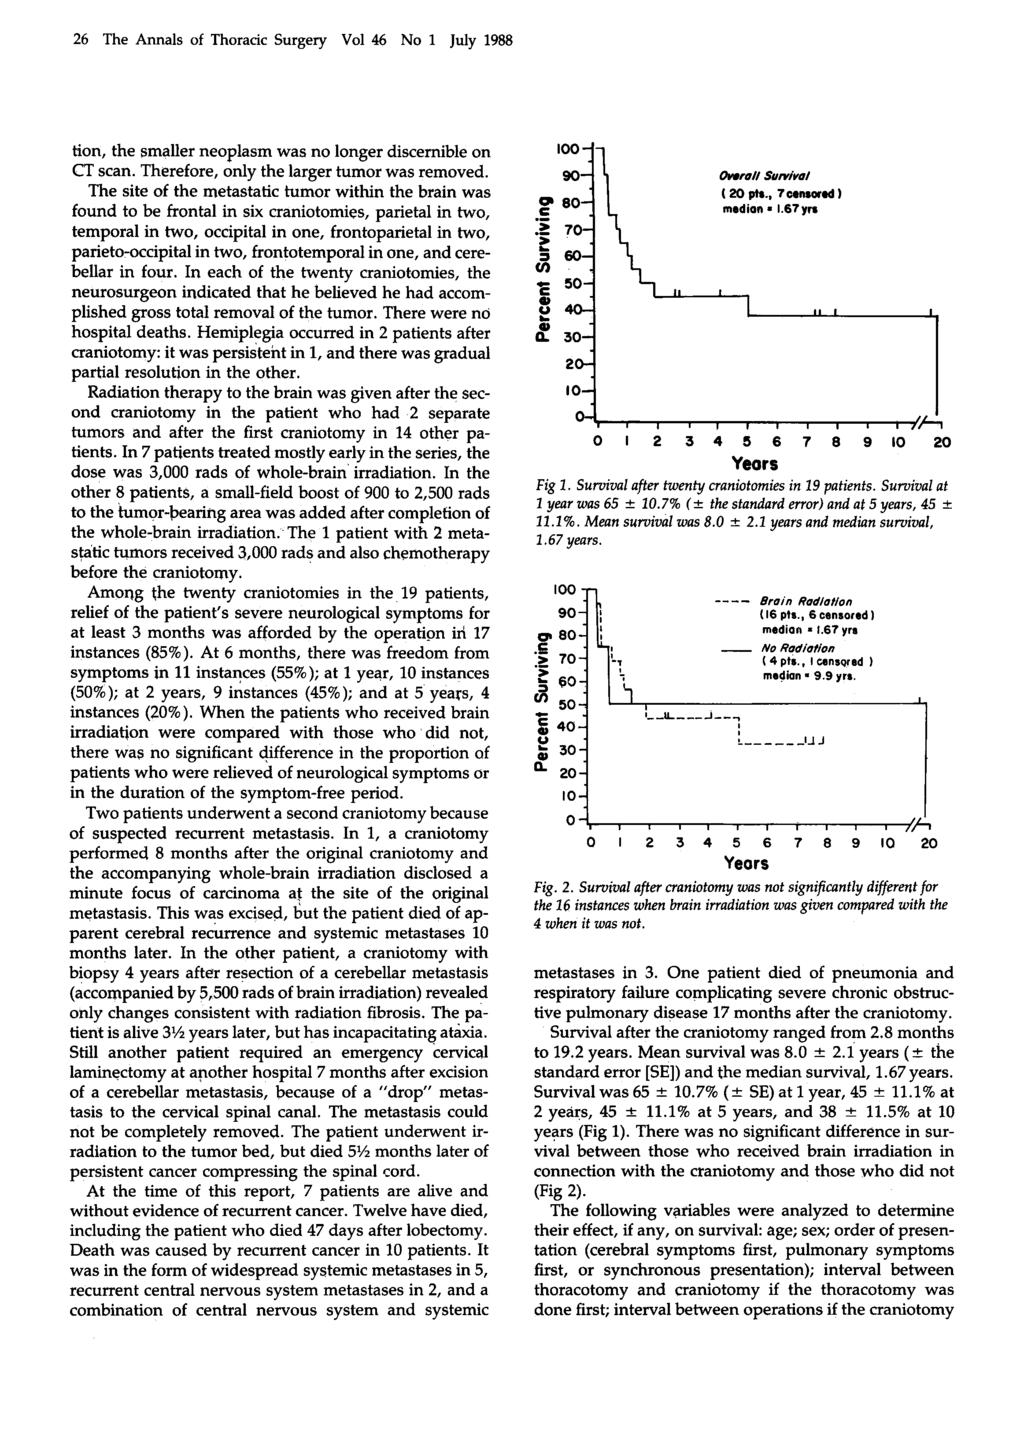 26 The Annals of Thoracic Surgery Vol 46 No 1 July 1988 tion, the smaller neoplasm was no longer discernible on CT scan. Therefore, only the larger tumor was removed.